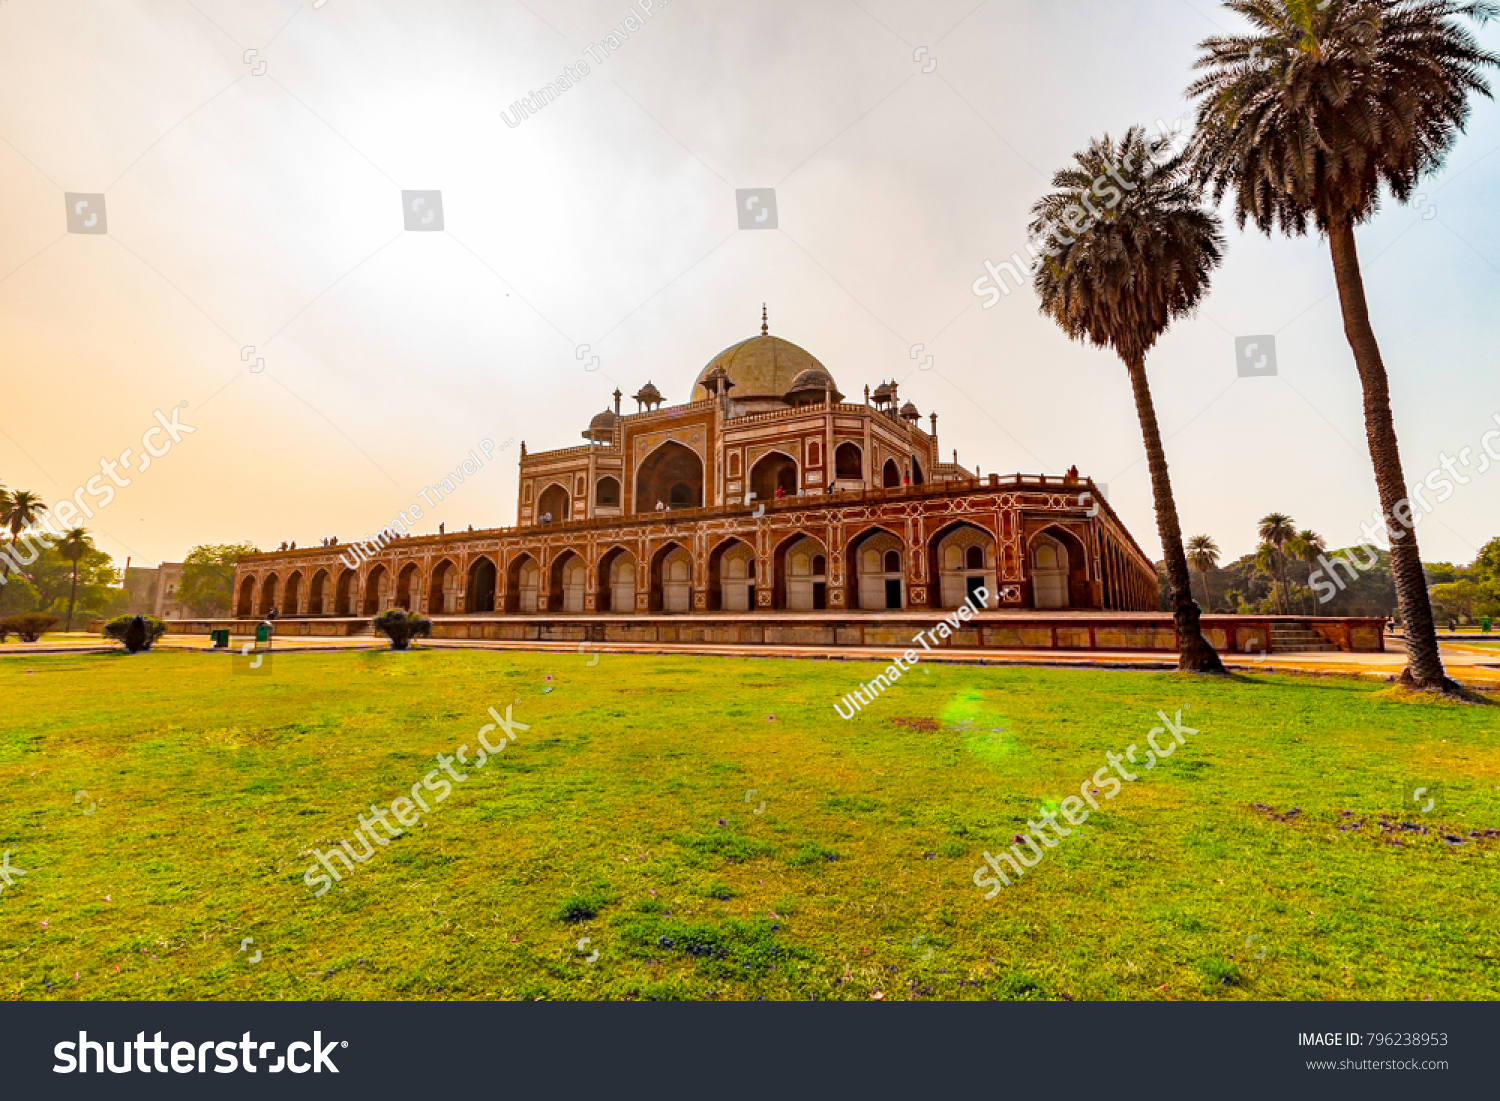 Humayun's Tomb in Delhi, India. The Humayun Tomb is also famous tourist place in Delhi. Locals also come to see this great Persian architecture marvel. Humayun Tomb is the last resting of the Emperor. #796238953